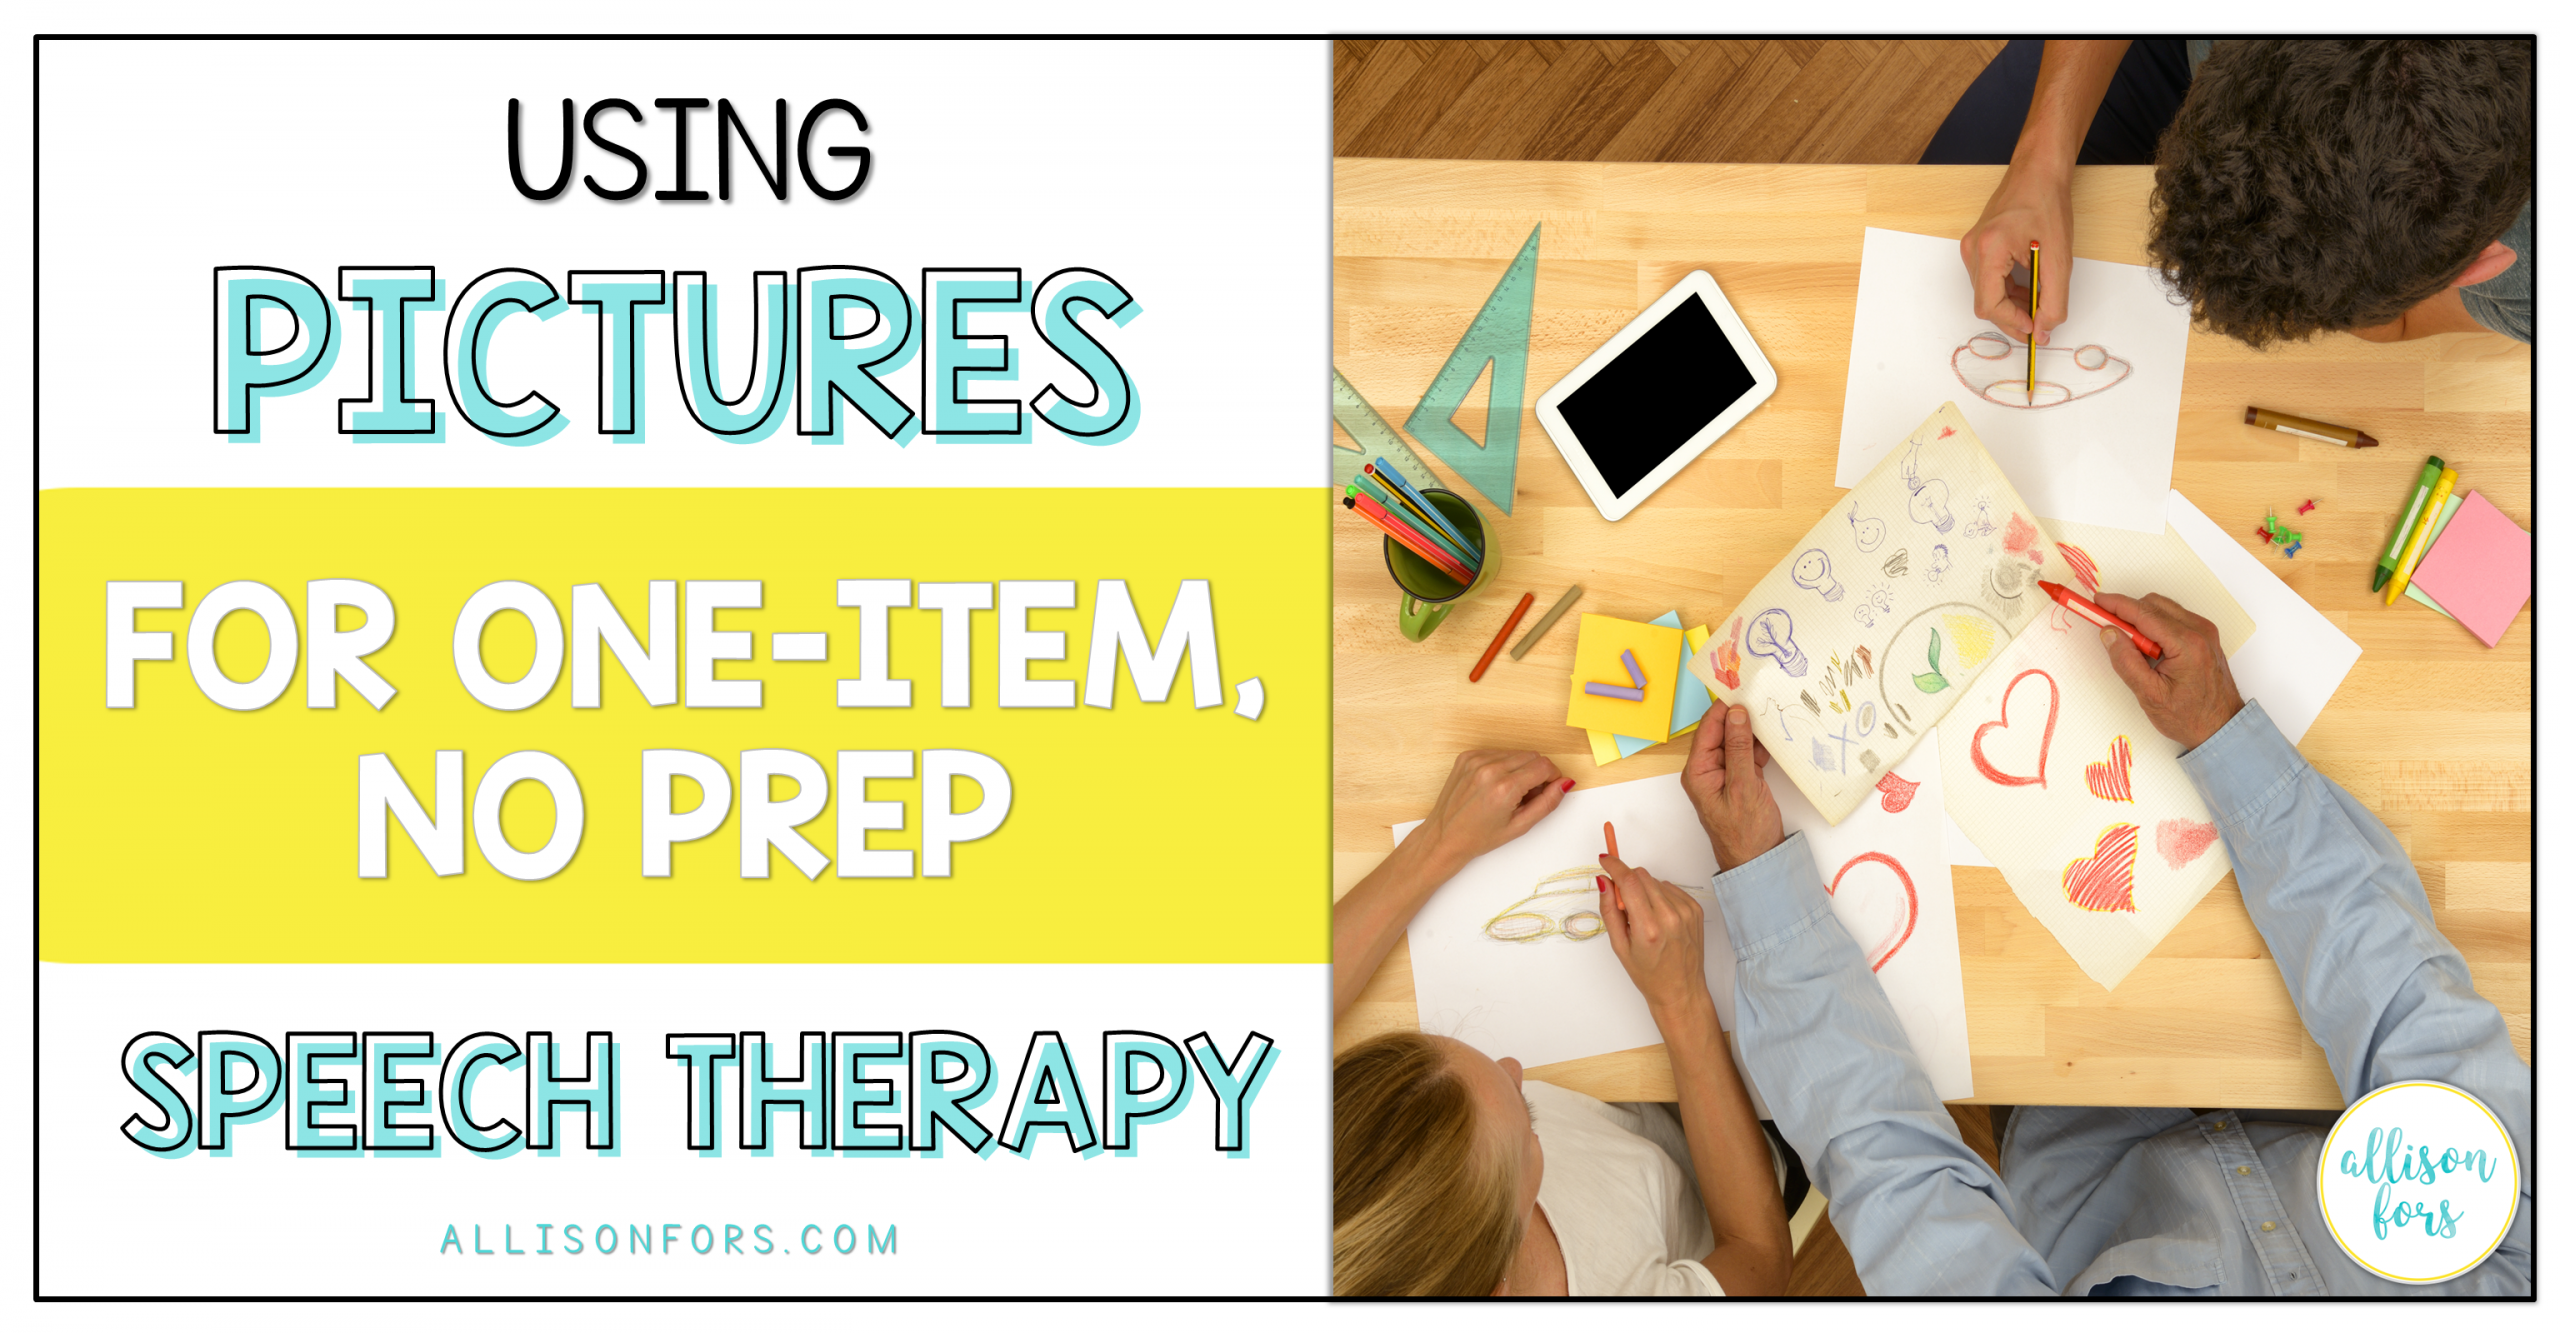 Using Pictures for One-Item, No-Prep Speech Therapy